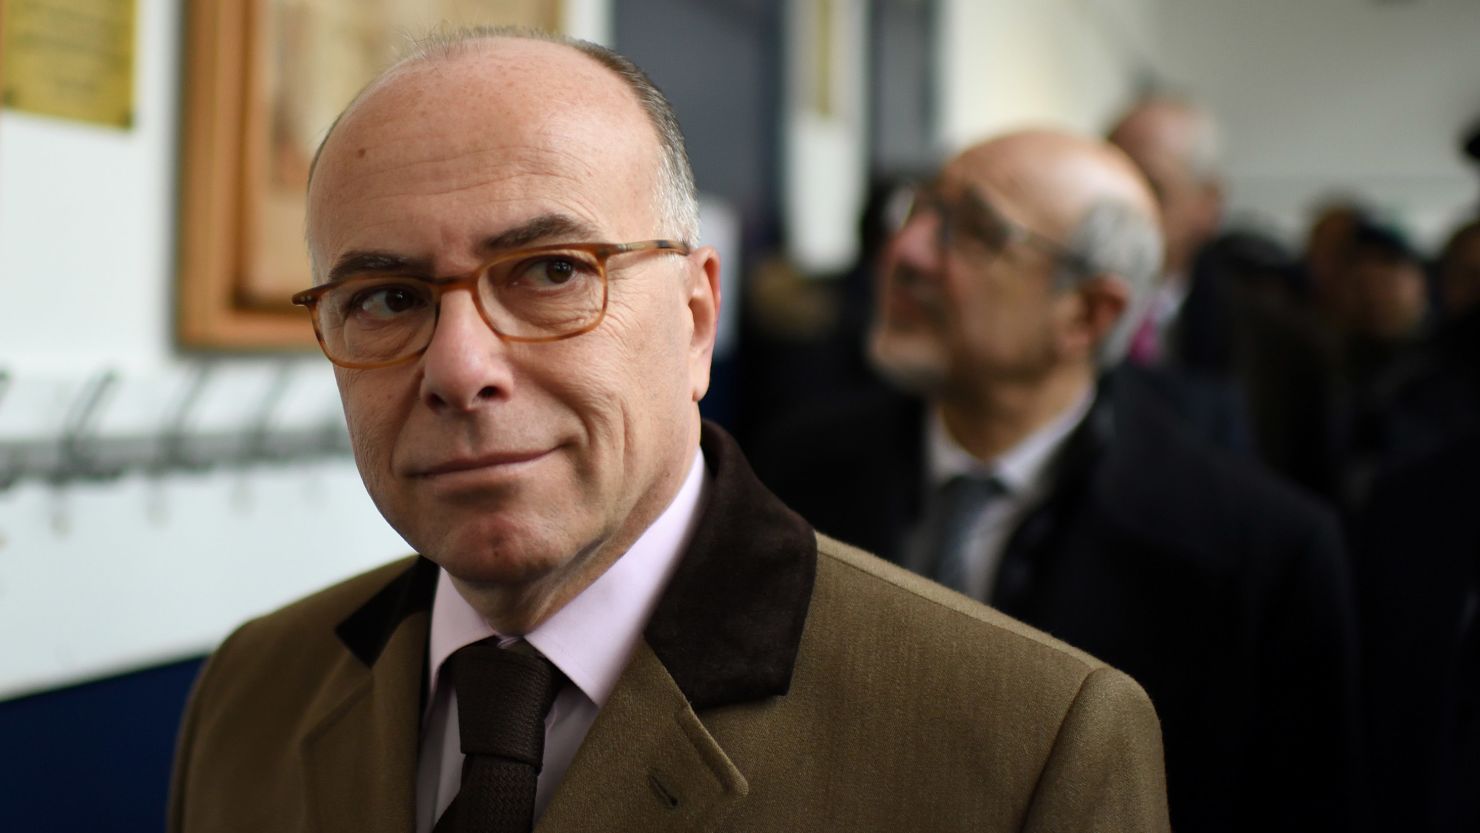 Bernard Cazeneuve is best known for overseeing the nation's security forces in response to a spate of terror attacks. 